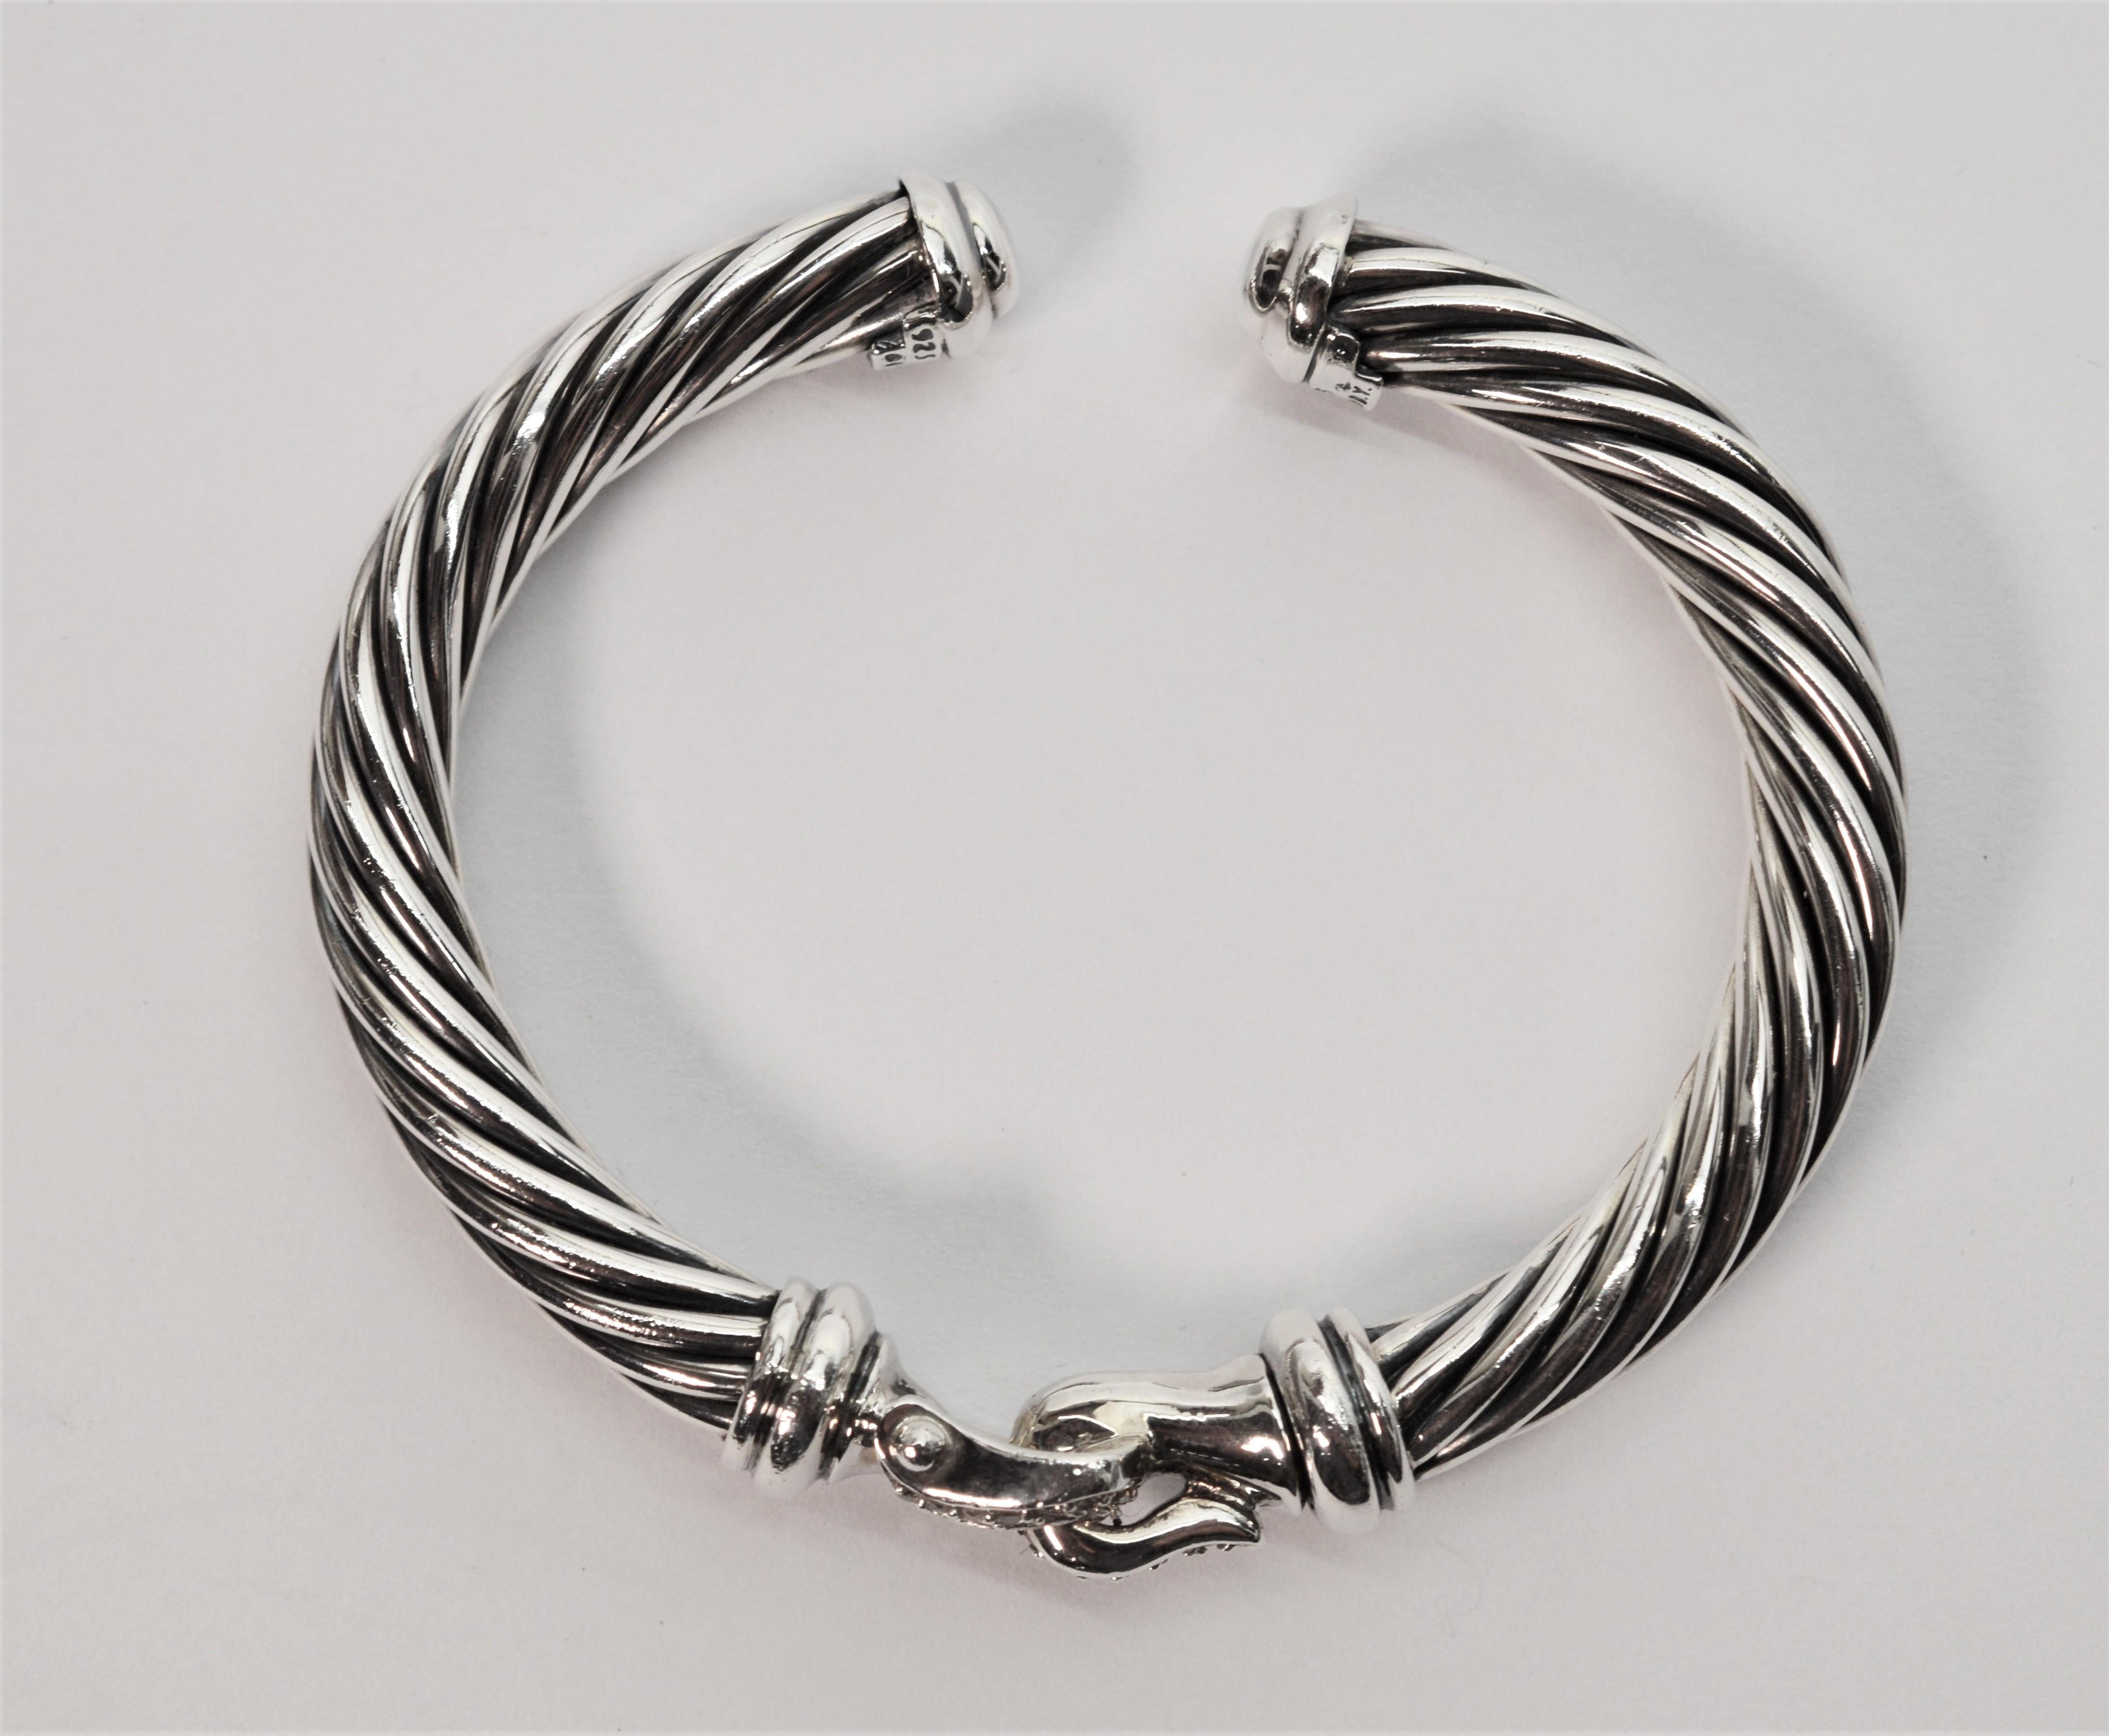 Prong set diamonds sparkle on the buckle featured on this Cable Classic Sterling Silver Cuff Bracelet by well-known designer David Yurman. With .18 carat diamonds total weight, this timeless DY bracelet has an overall measurement of 2-1/2 x 21/4